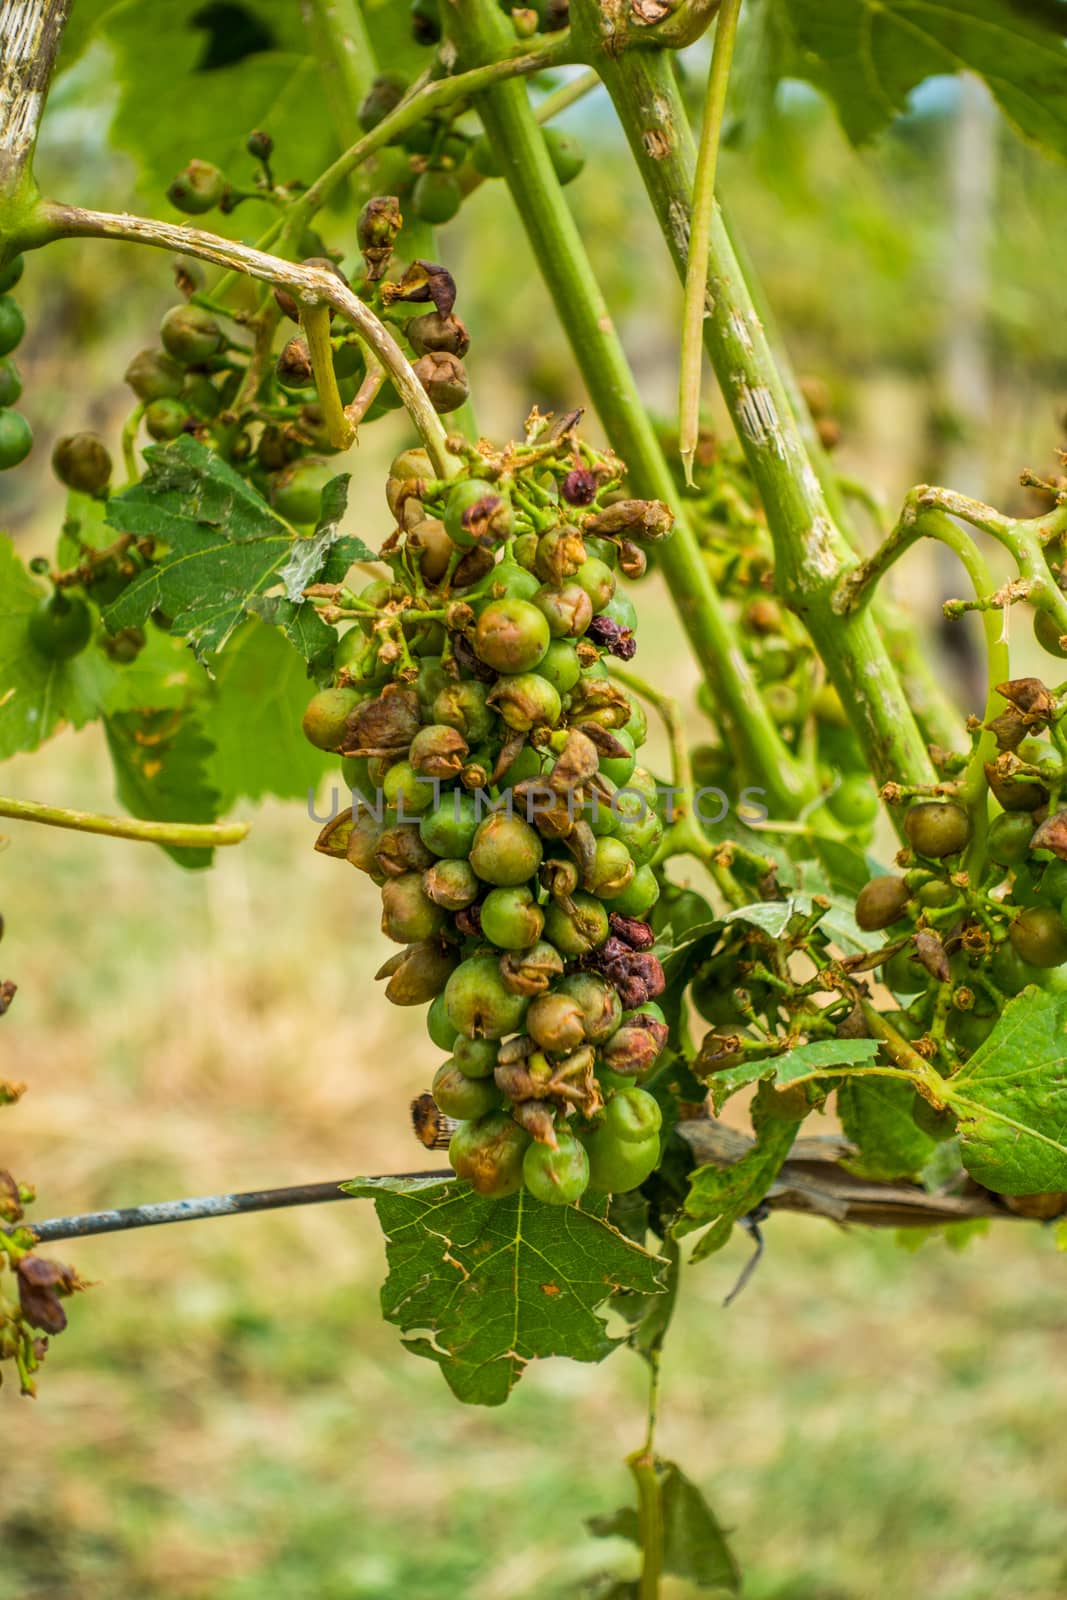 Vineyard and grapes damaged and crop destroyed after severe stor by asafaric